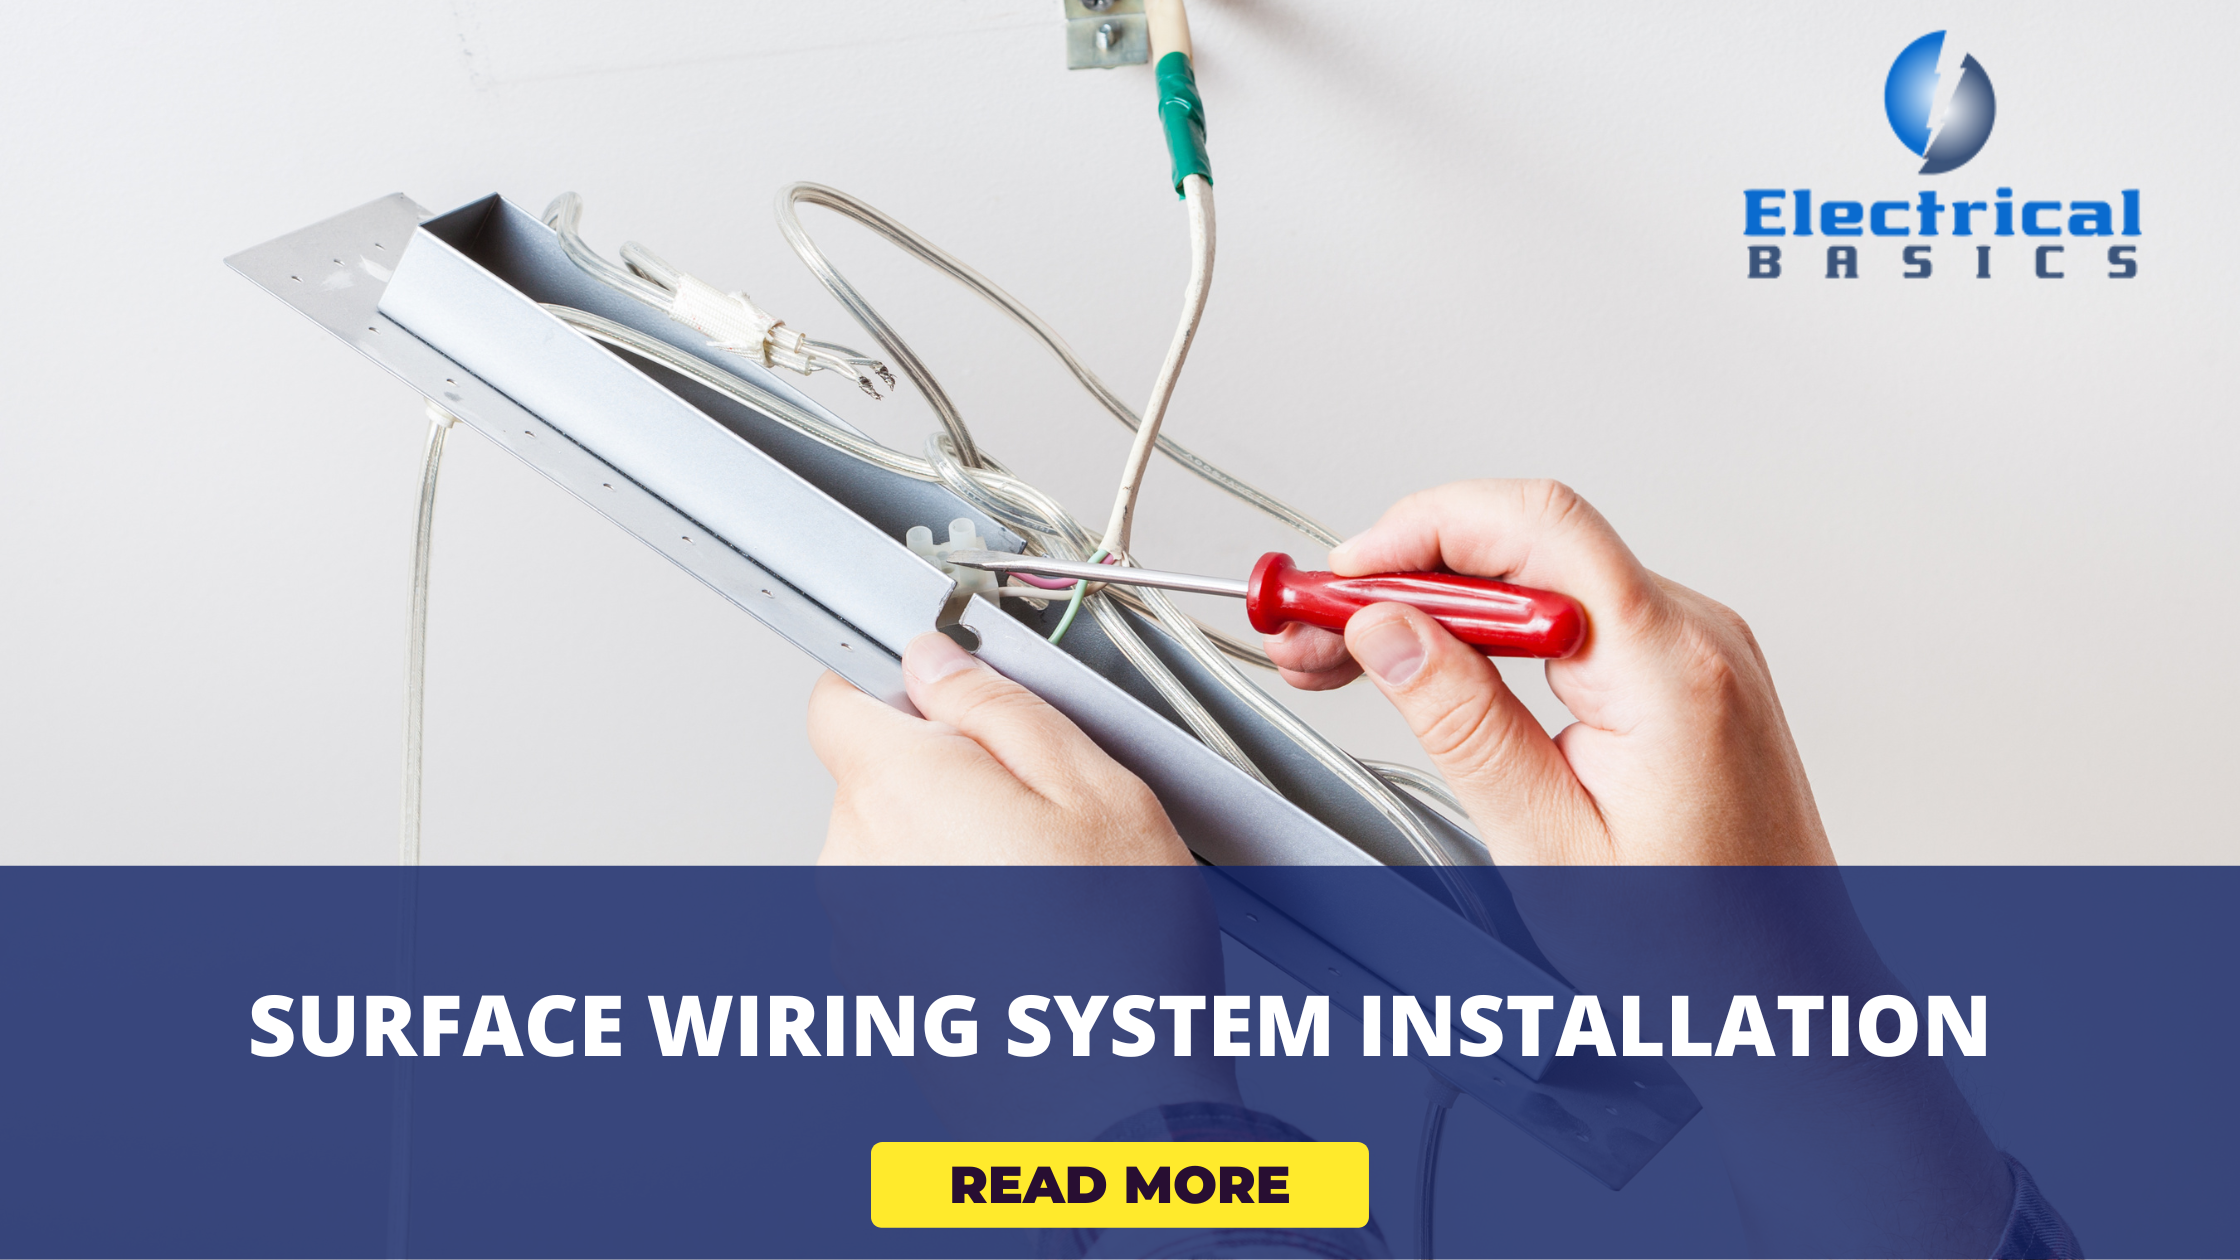 How to Install Surface Wiring